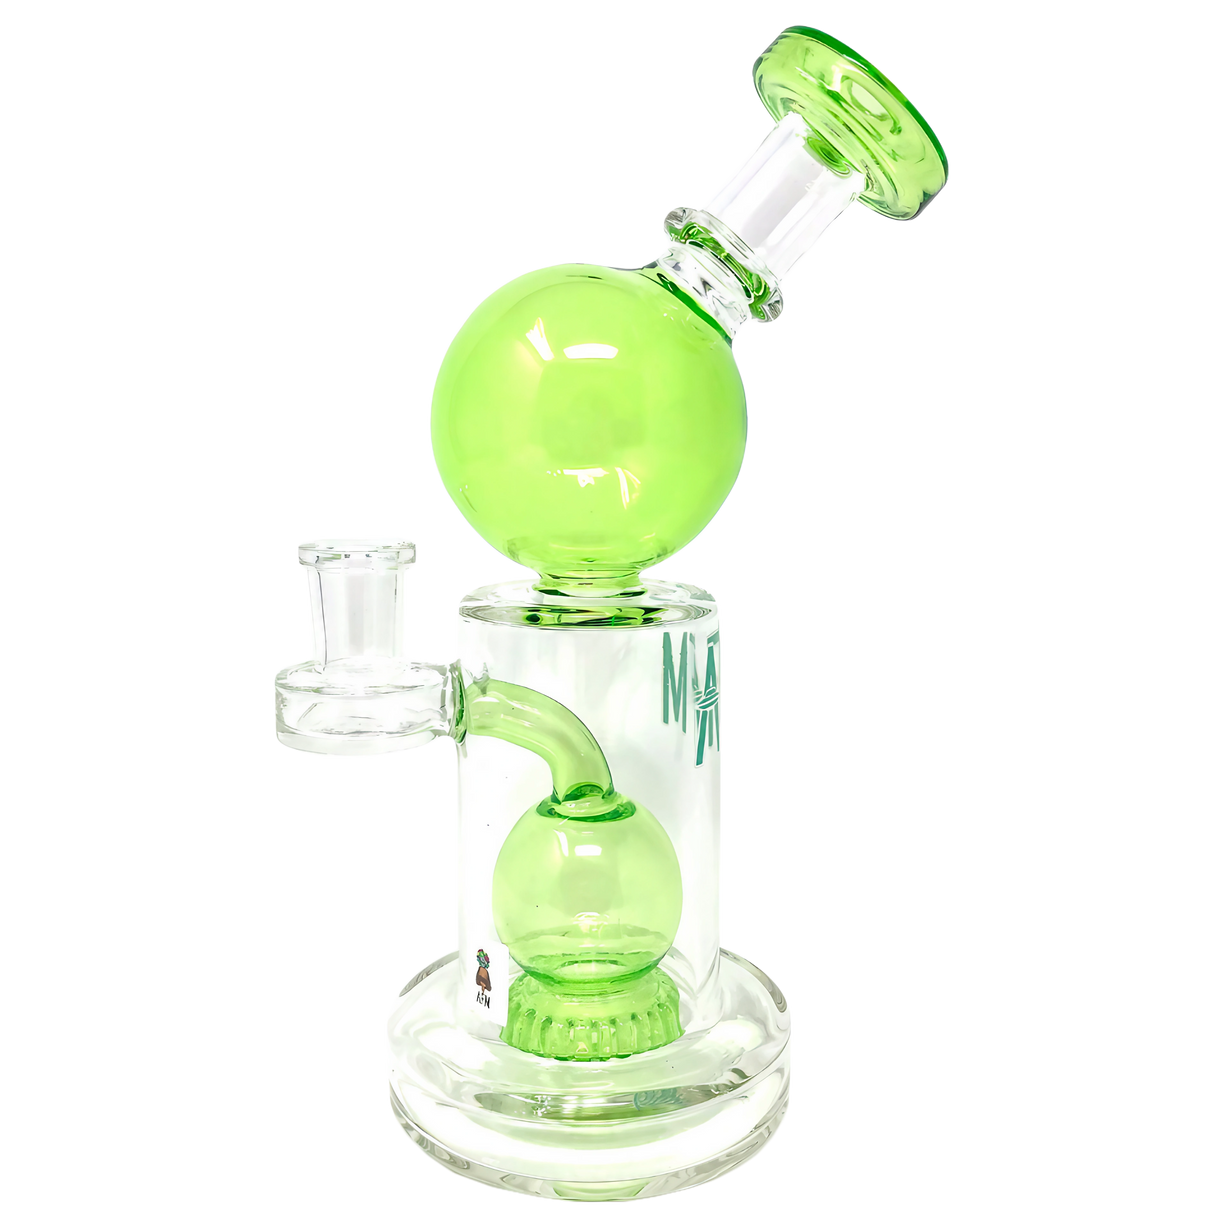 AFM Bubble Head Banger Hanger Dab Rig in Lime, 8" with Showerhead Percolator, Front View